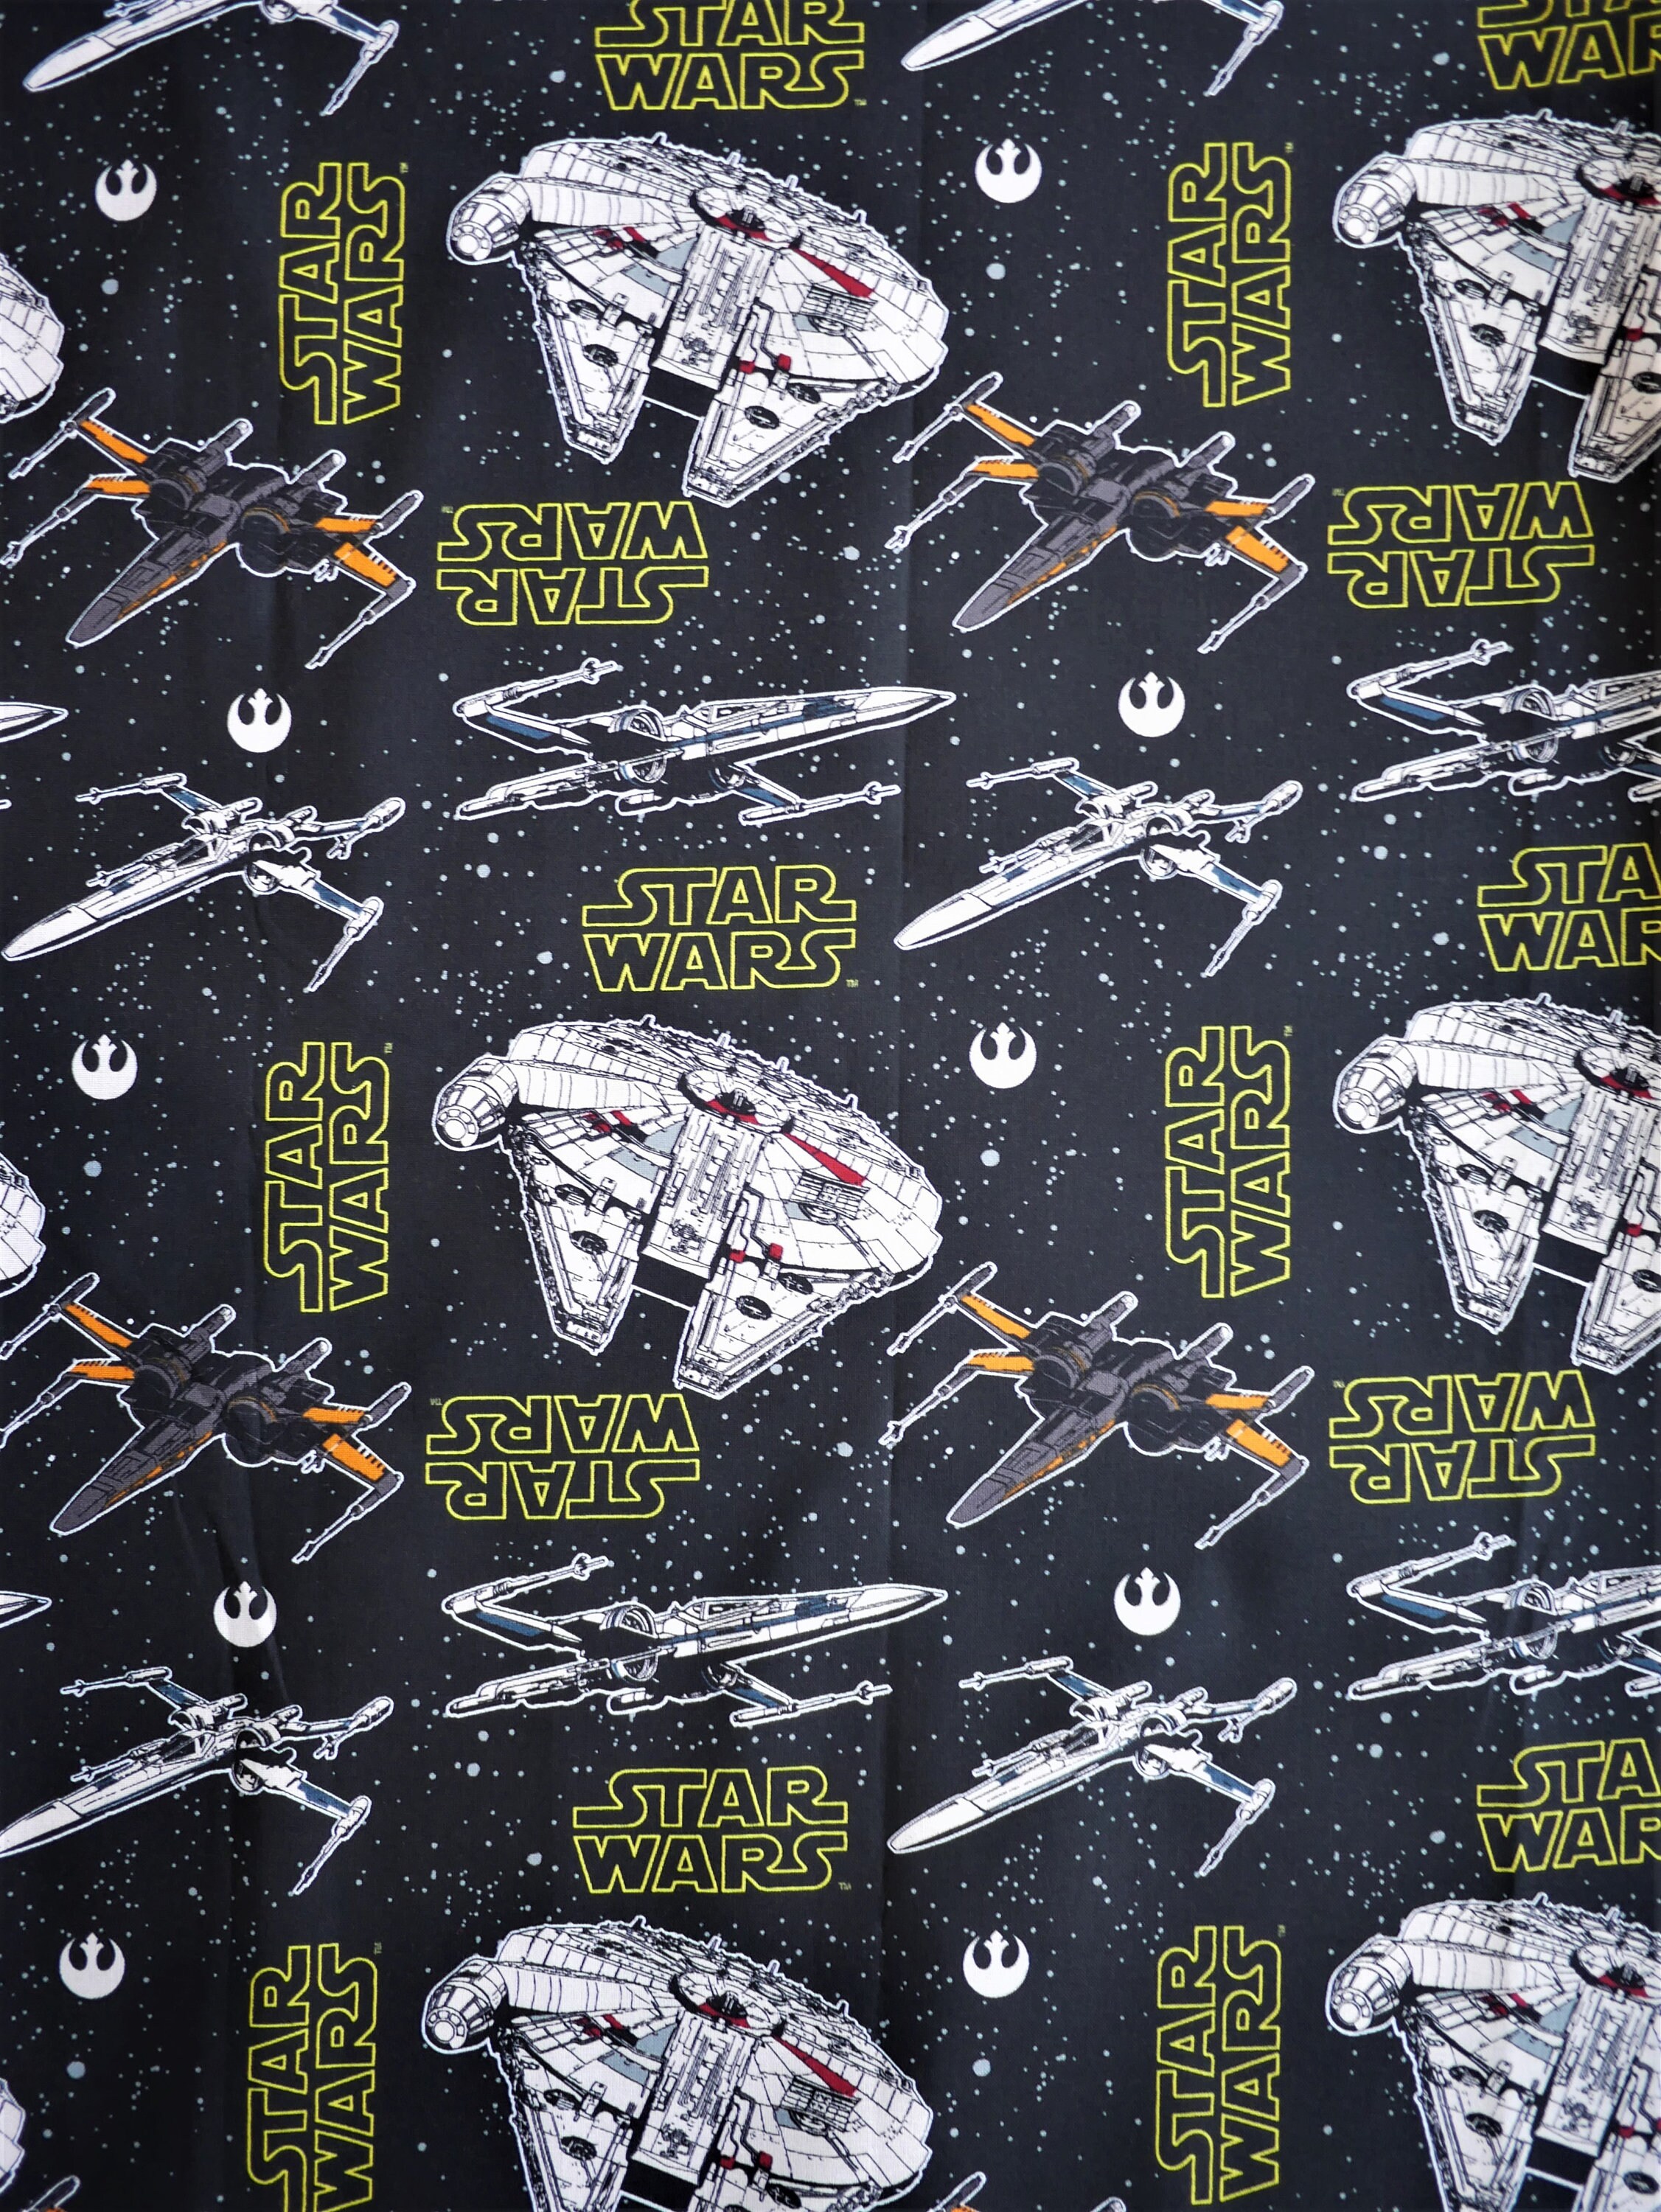 Disney Fabric Craft Fabric Mask Fabric Quilting Cotton Fabric Fabric by 1/4 Yard Fat Quarters Darth Vader Fabric Sewing Supplies,